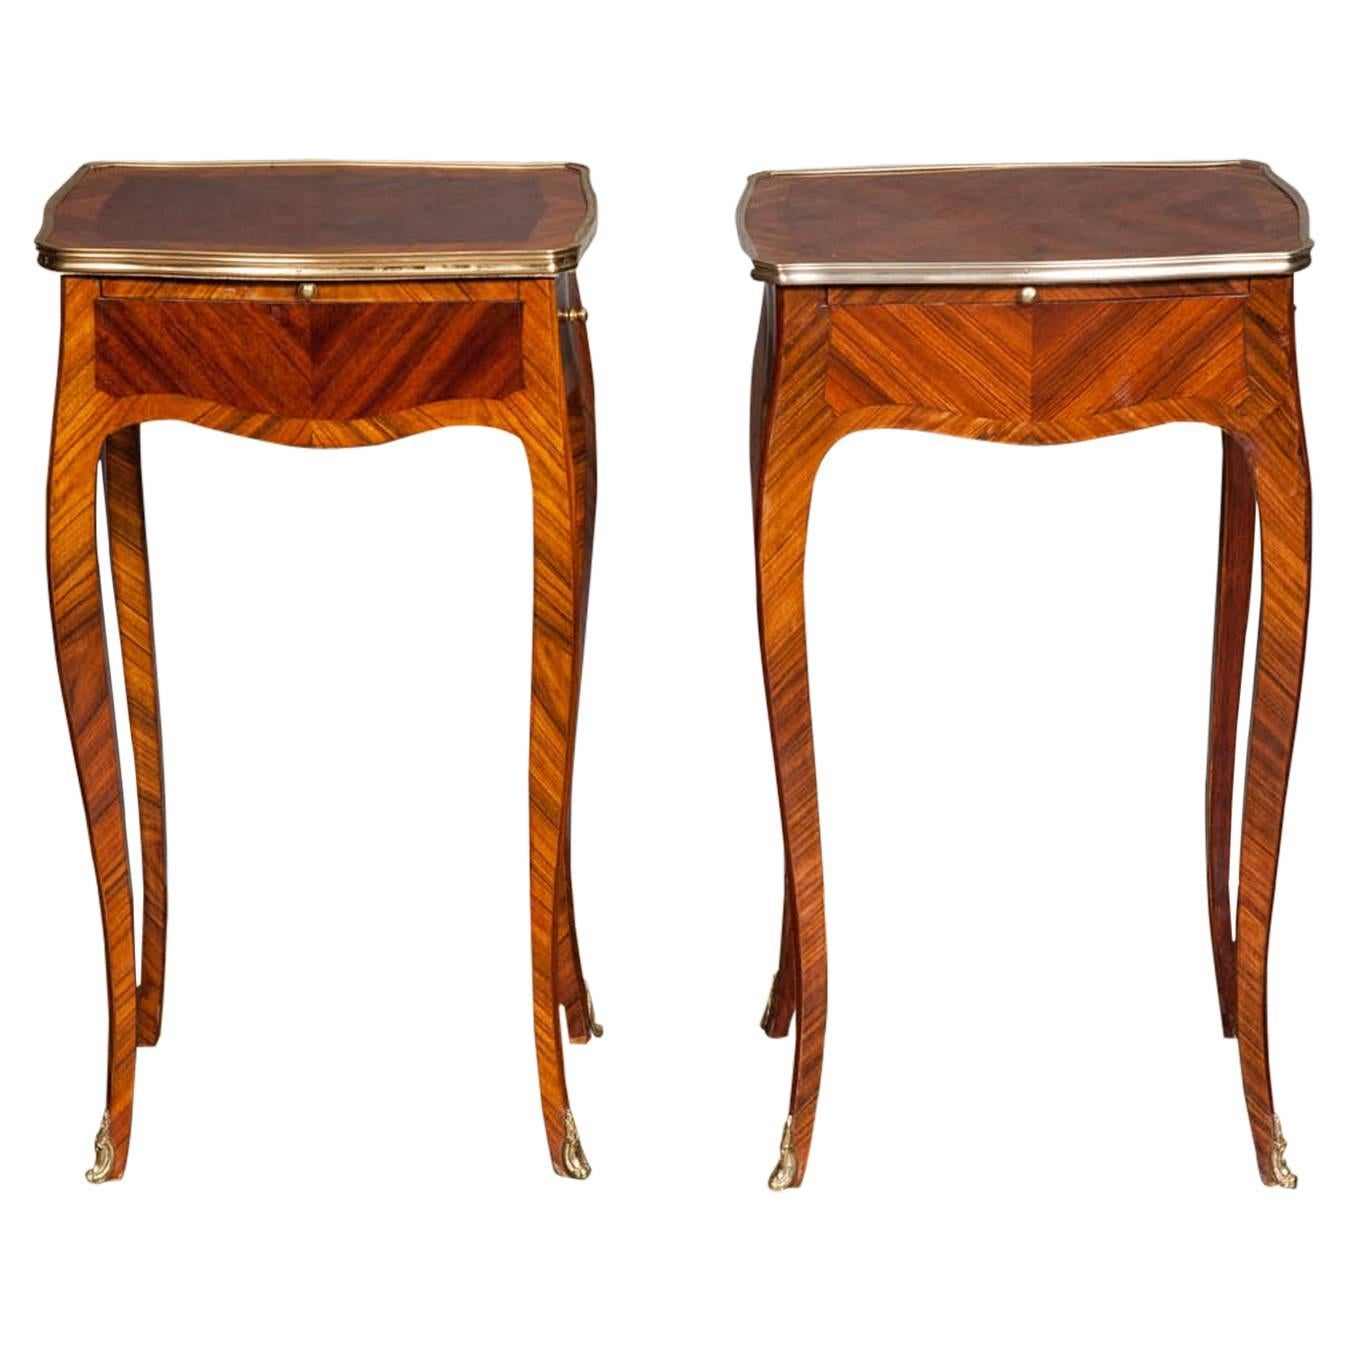 Pair of Louis XV Style Side Tables